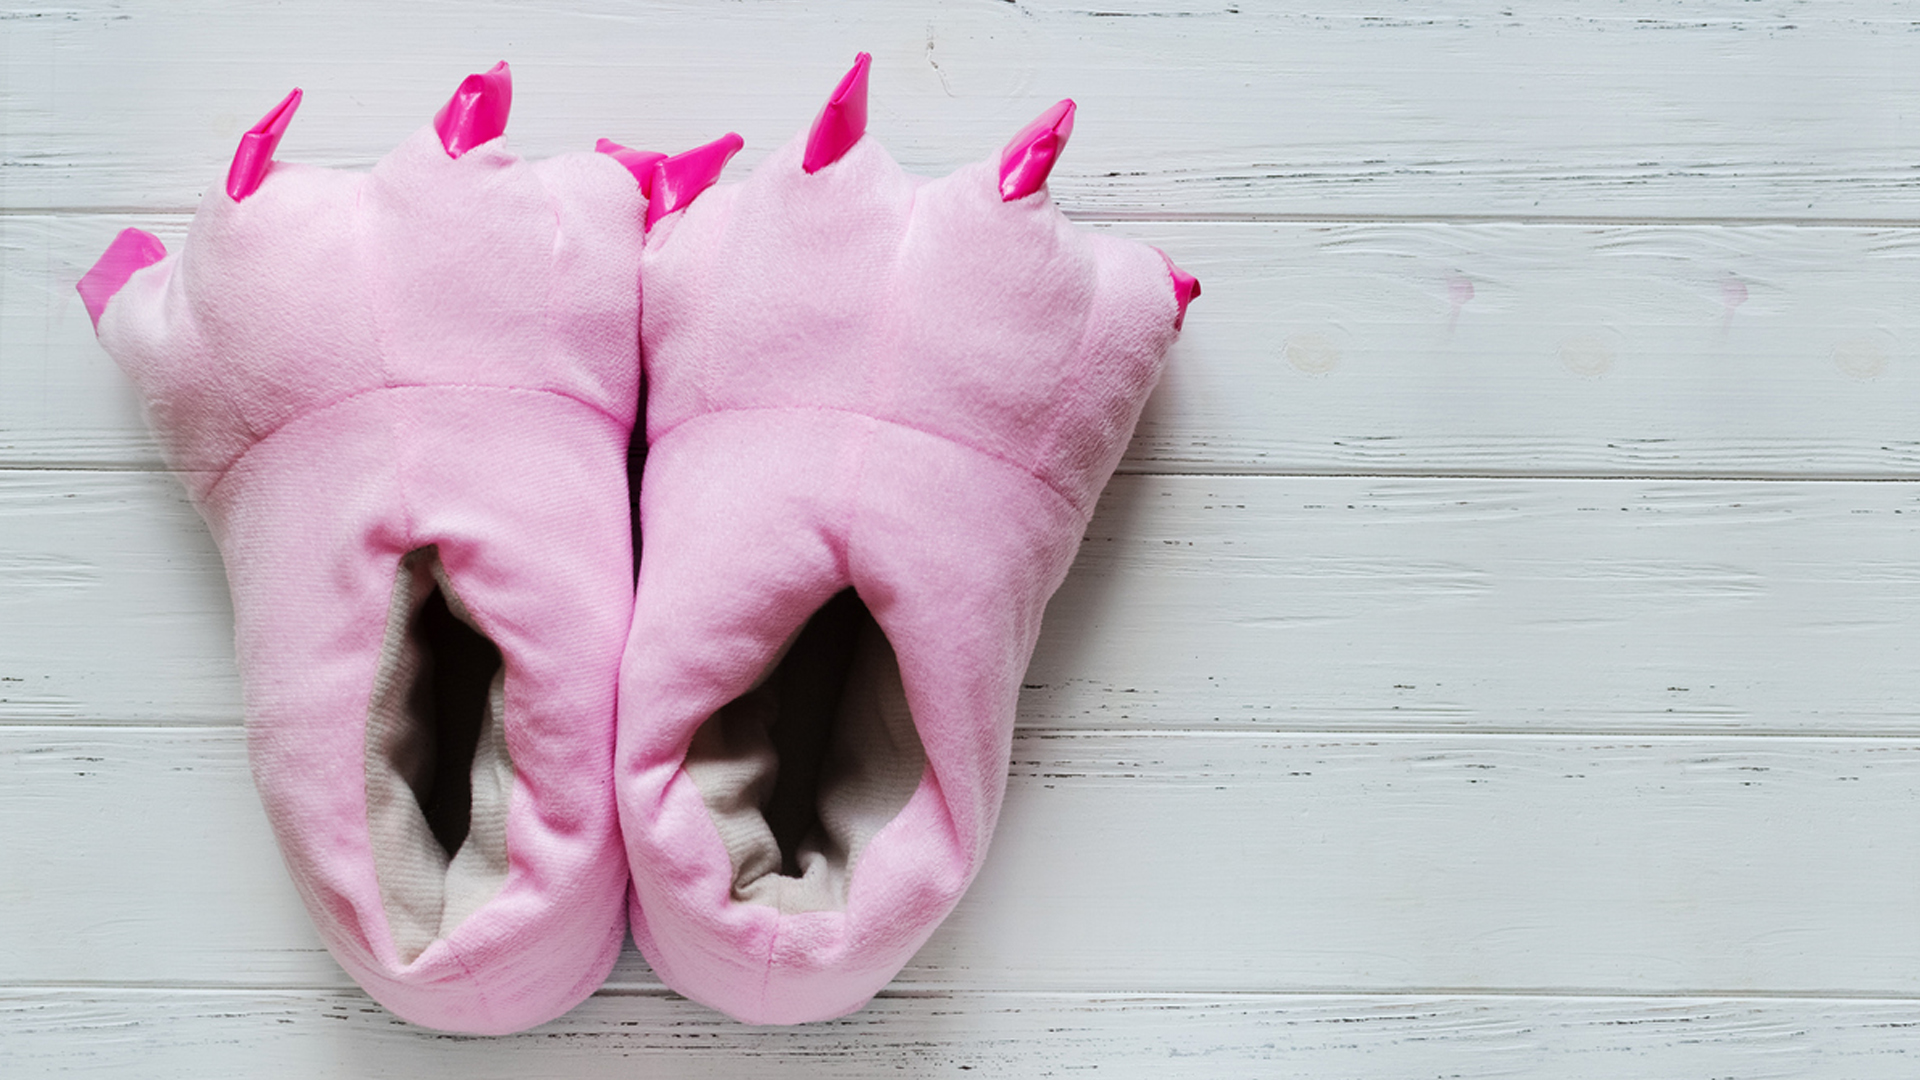 A pair of monster slippers